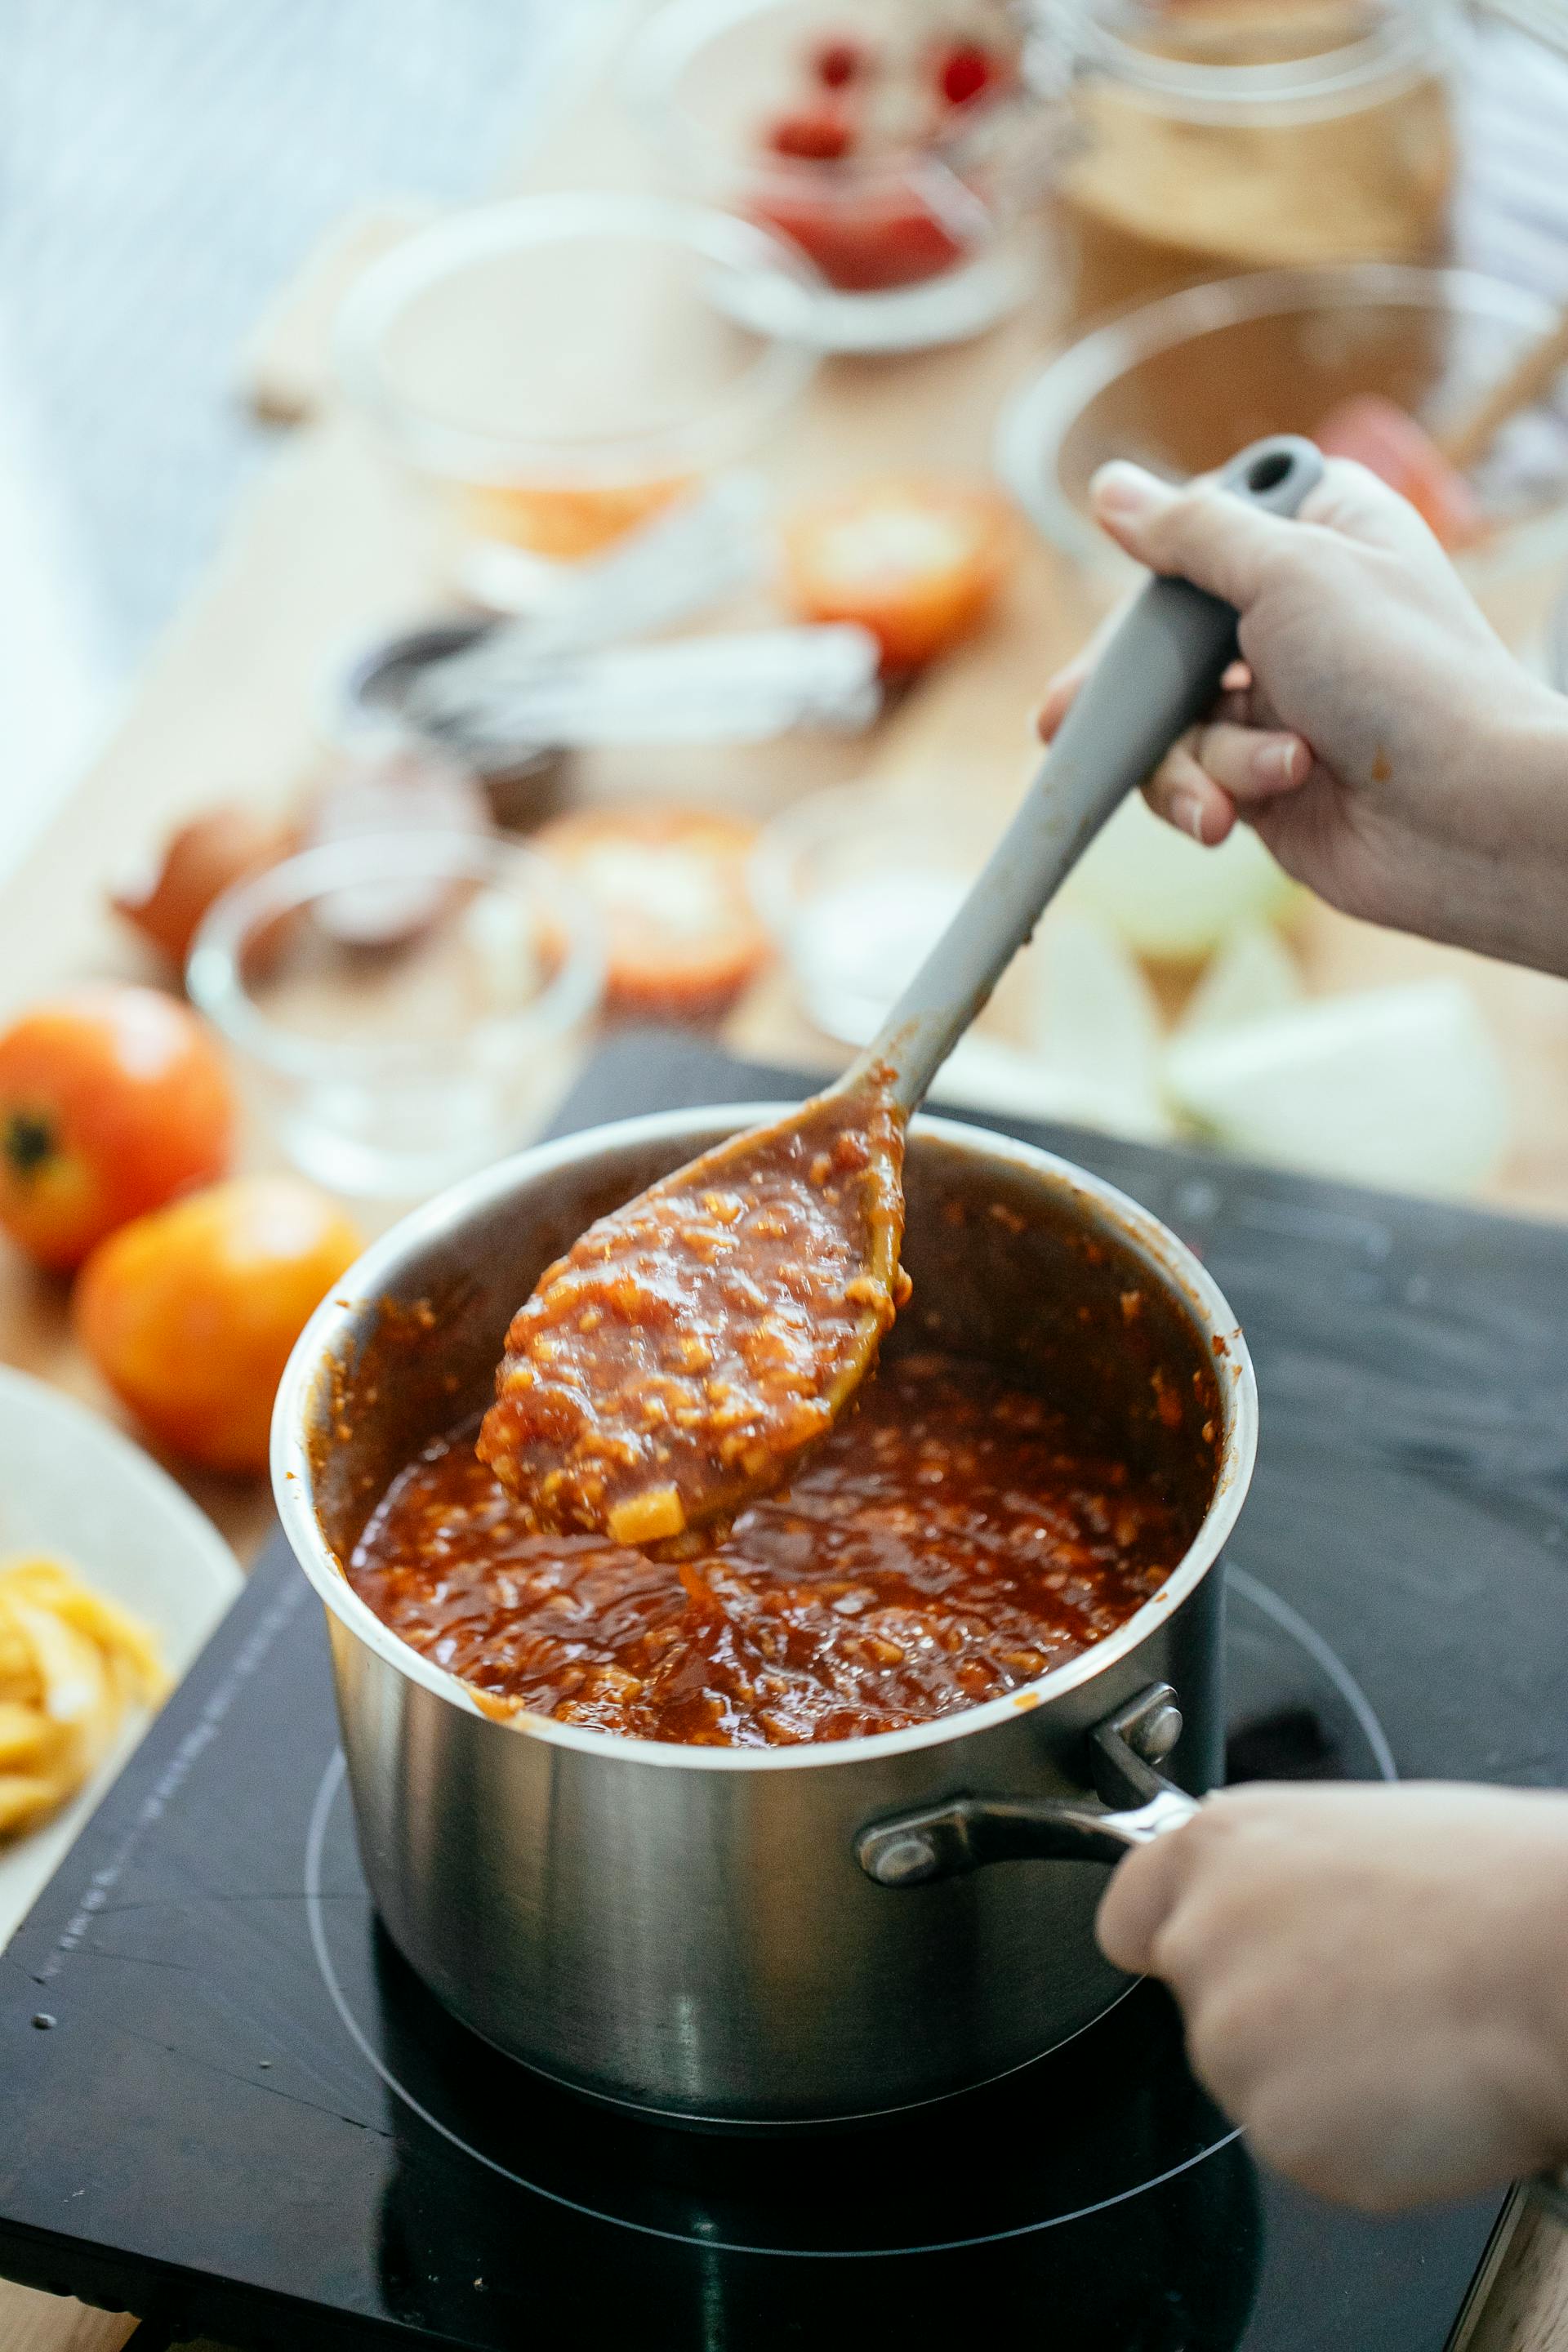 A person cooking food in the kitchen | Source: Pexels